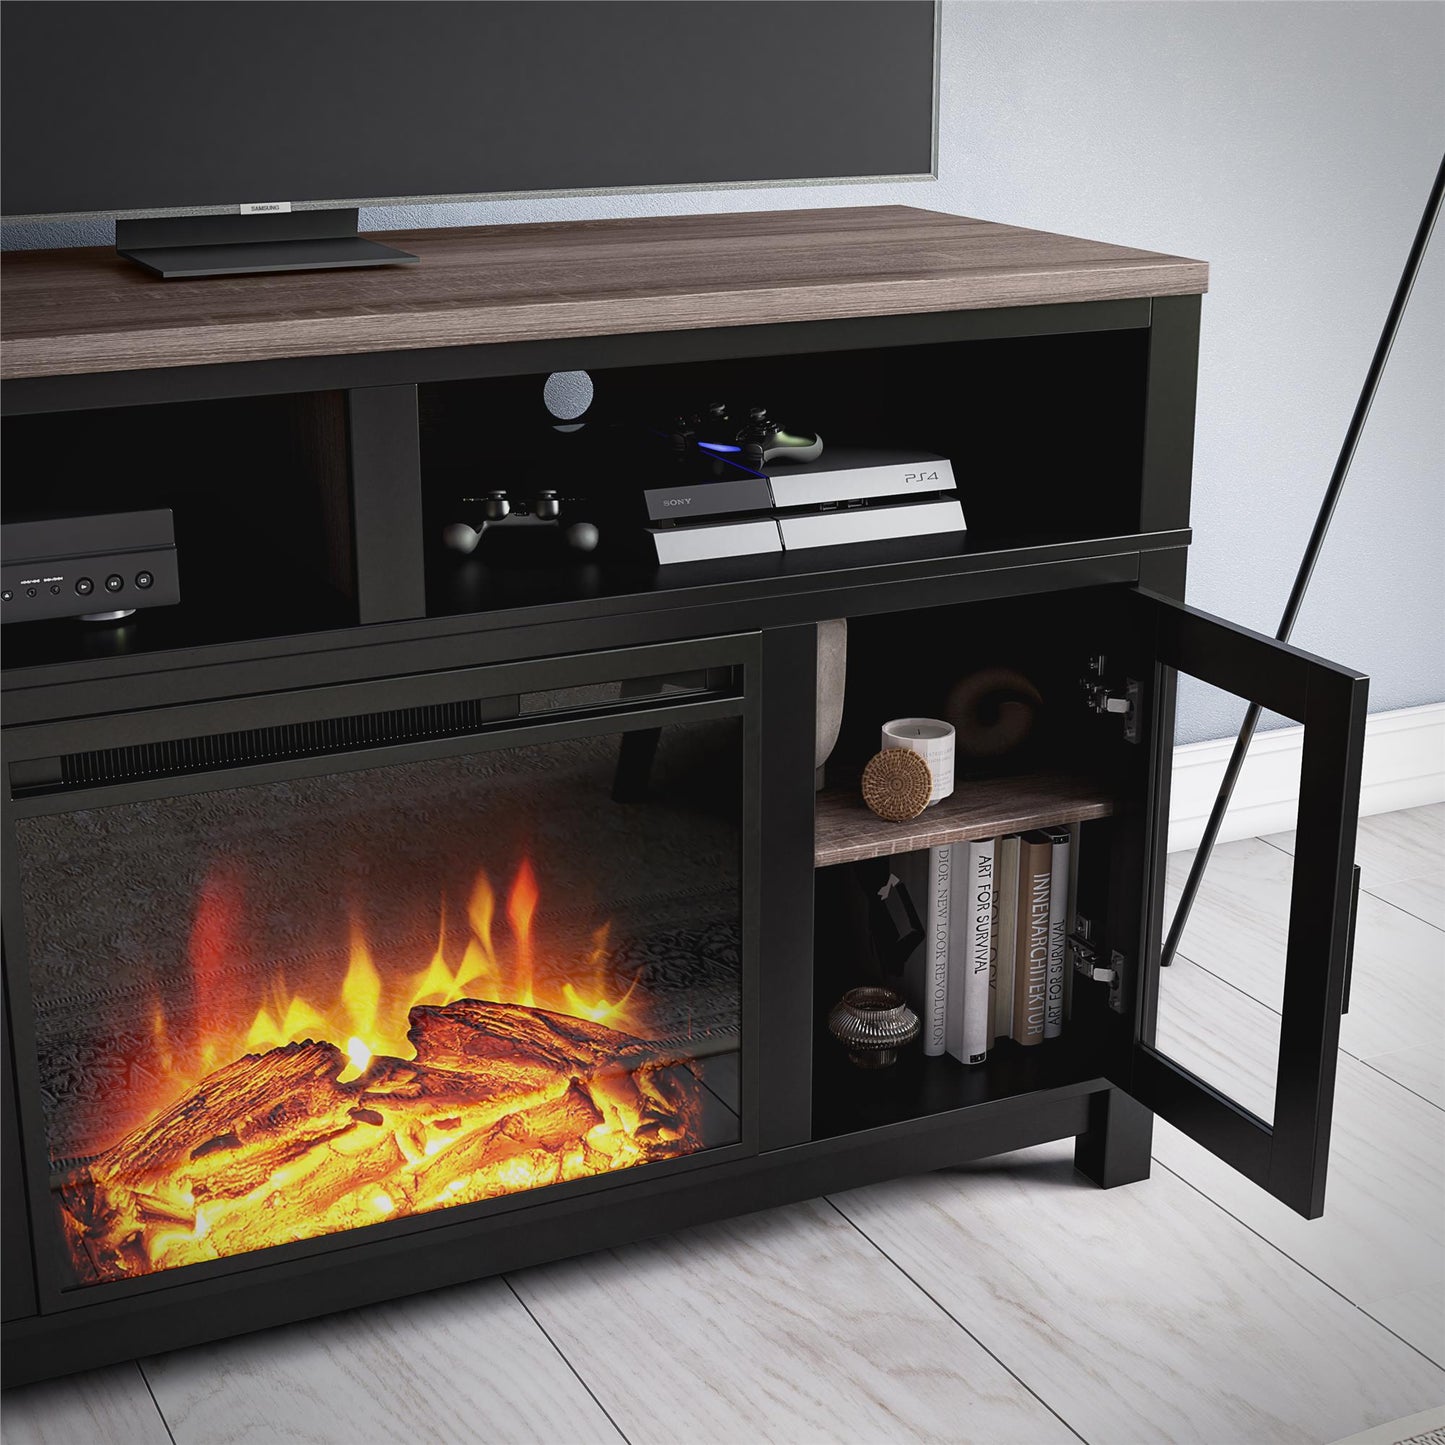 Carver Electric Fireplace TV Stand for TVs up to 60 Inch - Black